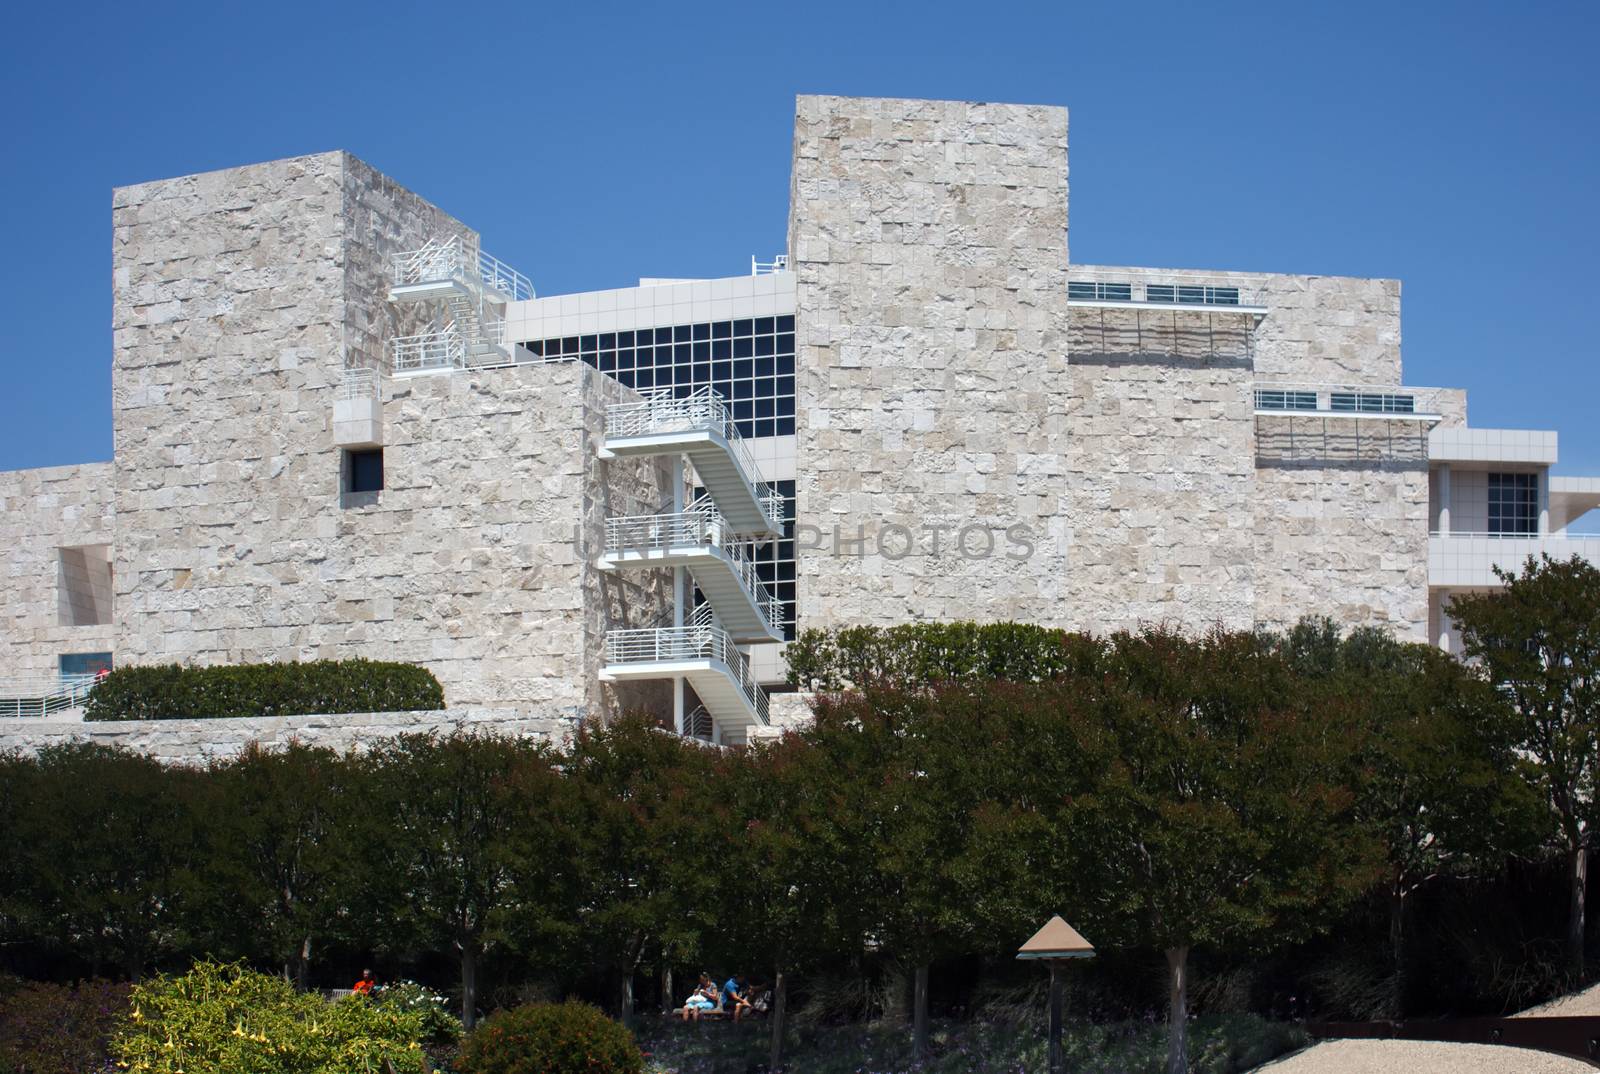 The Getty Center museum by Roka